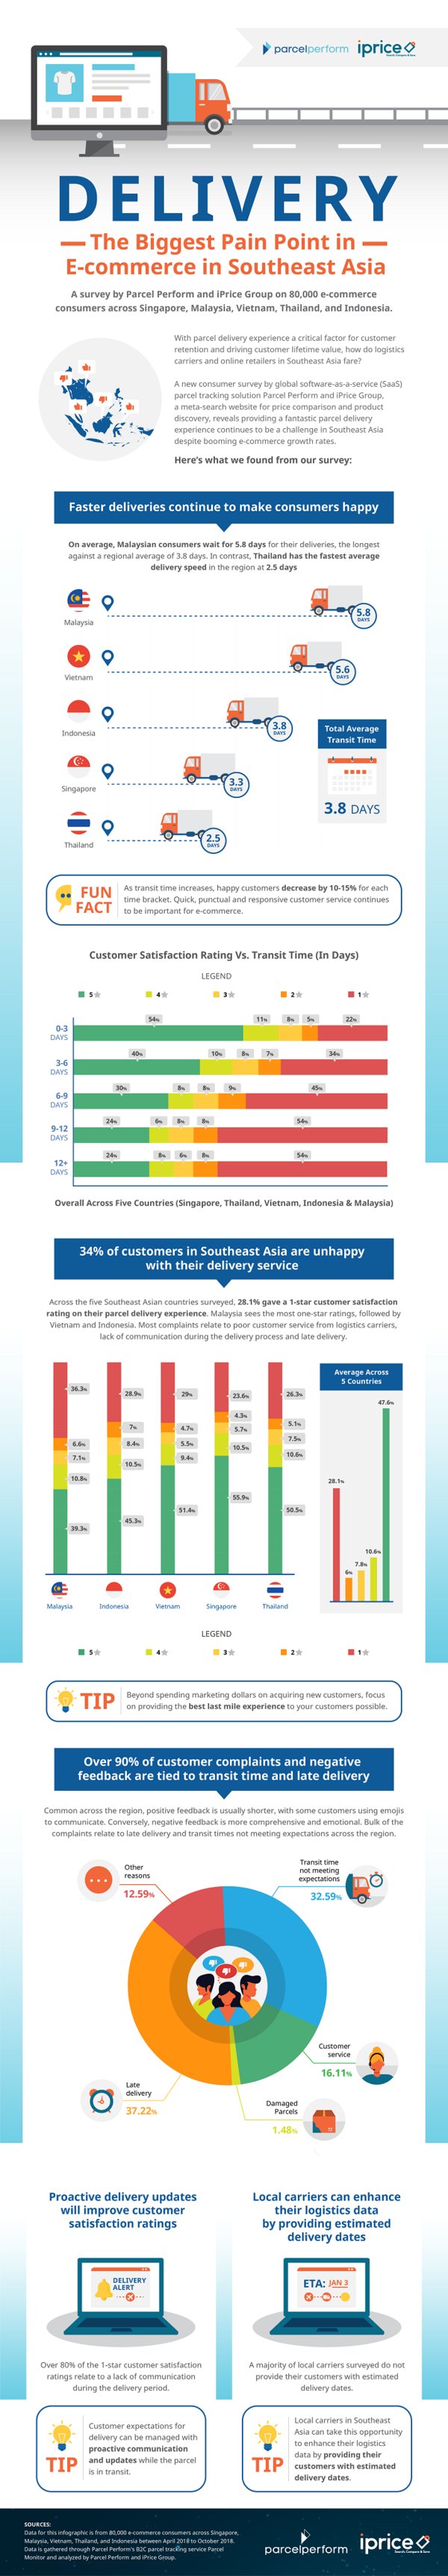 New Survey: Delivery Experience in Southeast Asia